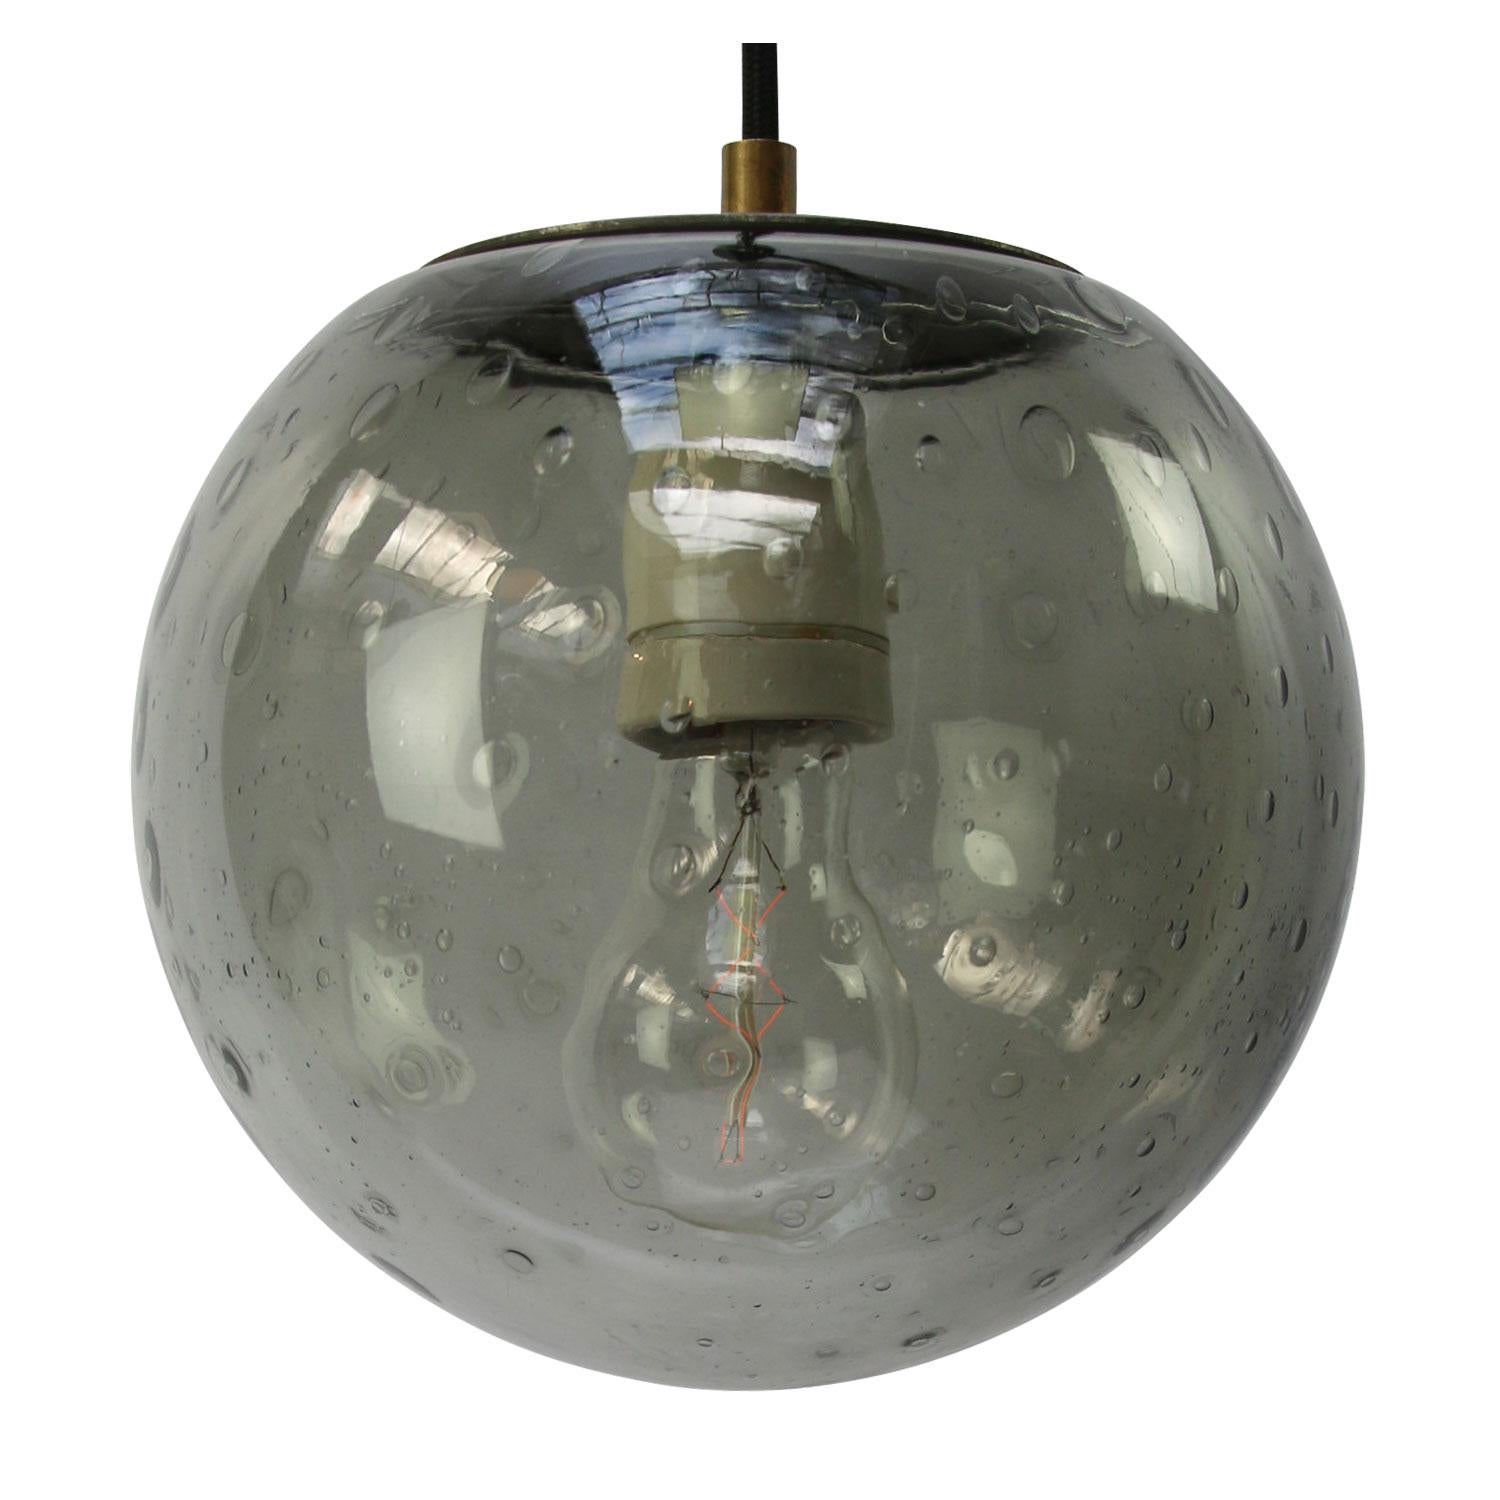 Original vintage smoked air bubble glass pendant.
2 meter black wire
Metal top

Weight: 2.00 kg / 4.4 lb

Priced per individual item. All lamps have been made suitable by international standards for incandescent light bulbs, energy-efficient